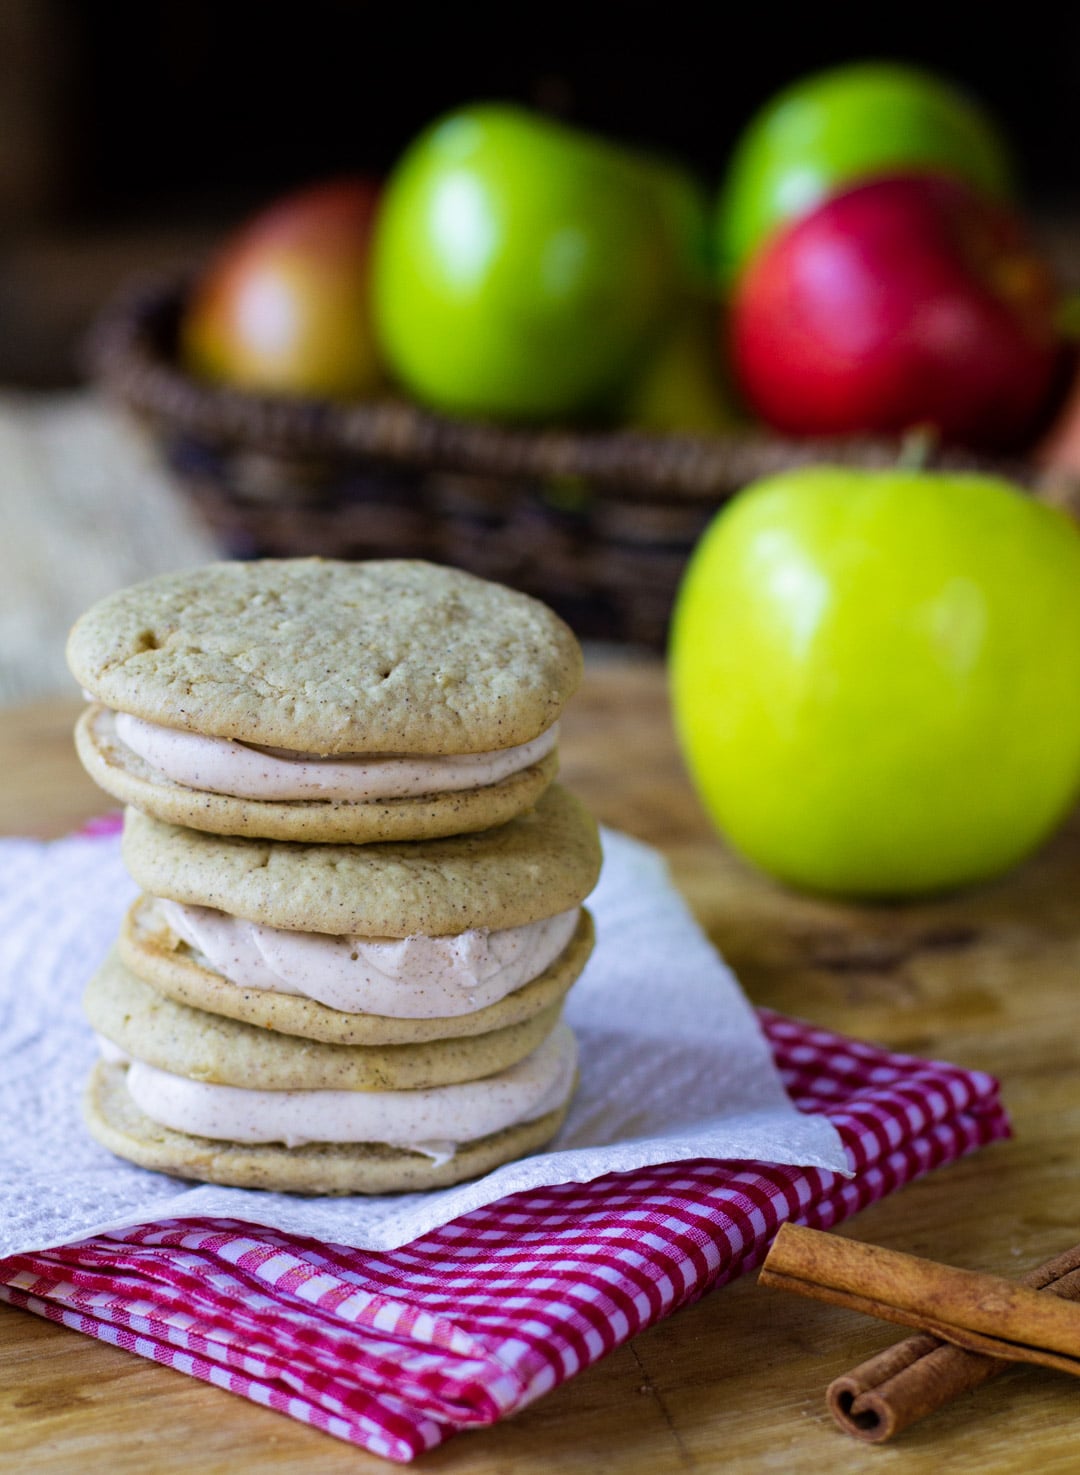 Whoopie pies on a plate and fresh apples in background.